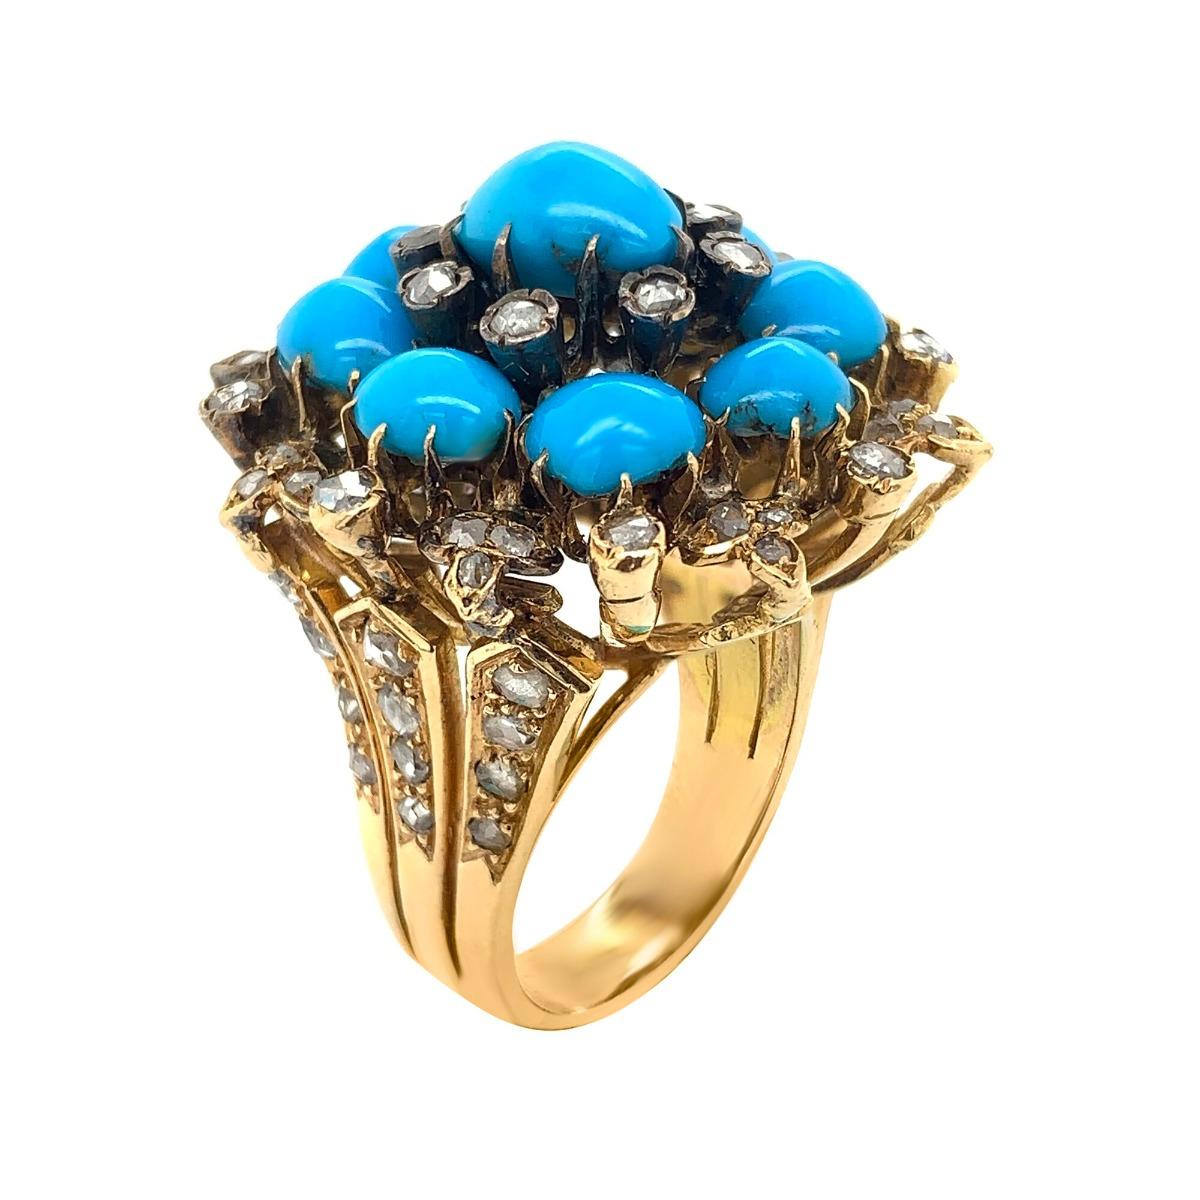 Metal: 18k Gold
Condition: Excellent
Circa 1900
Ring Size:8
Gemstone: Turquoise,Diamond
Turquoise Weight: 9 CT
Diamond Weight: 2 CT
Total Item Weight: 21.4 g